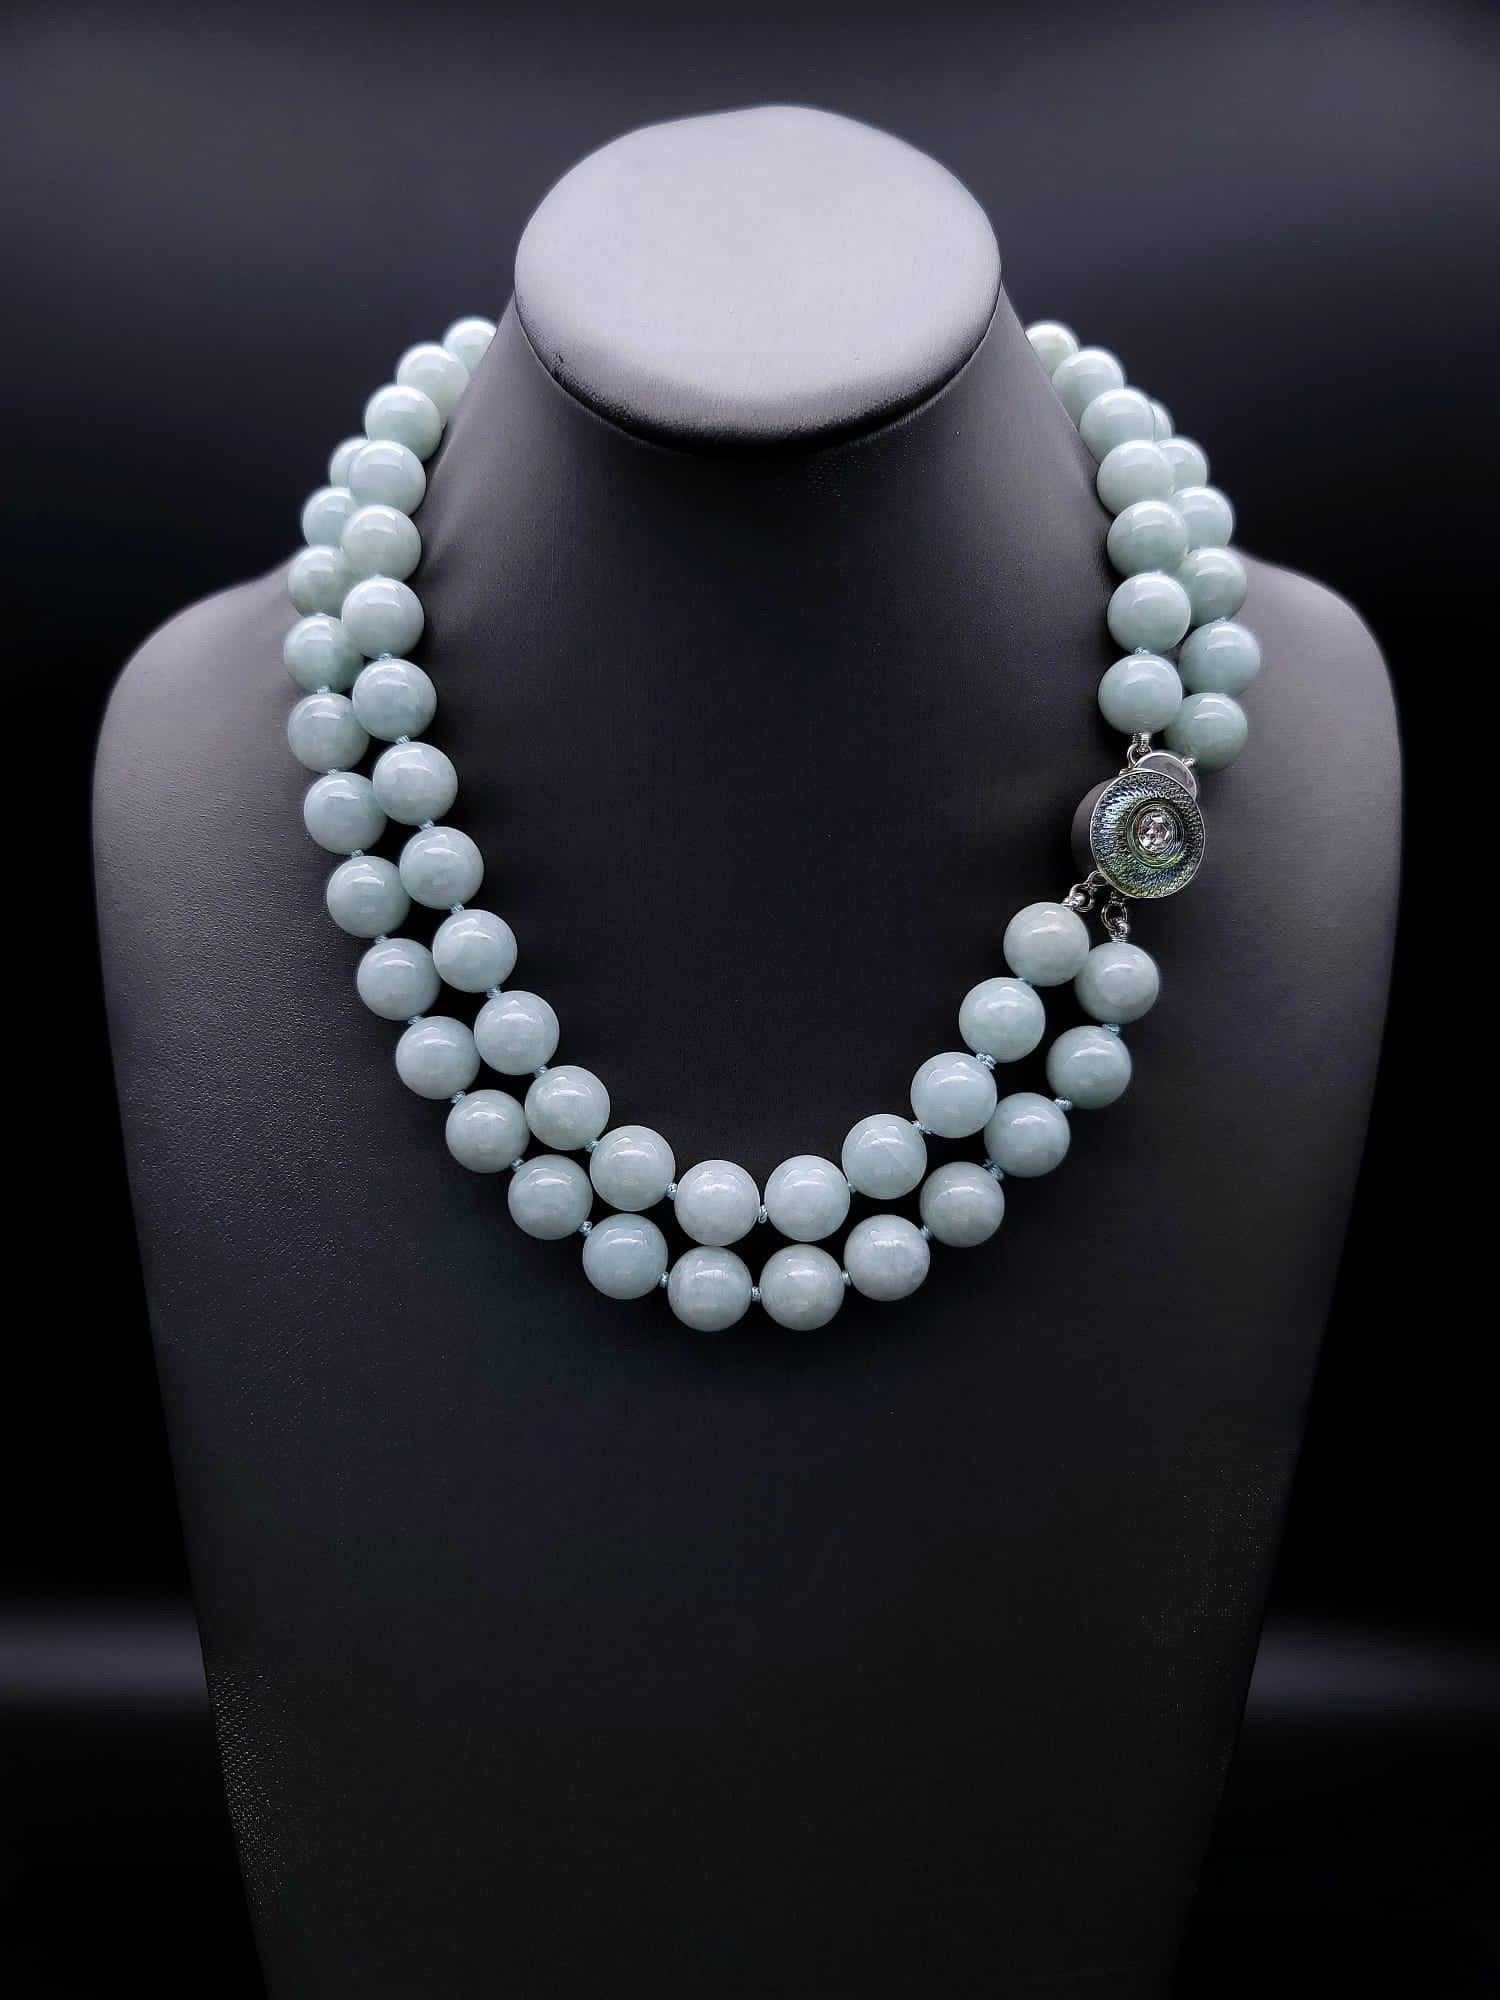 Women's or Men's A.Jeschel Elegant matched Burma Jade necklace with a signature clasp. For Sale